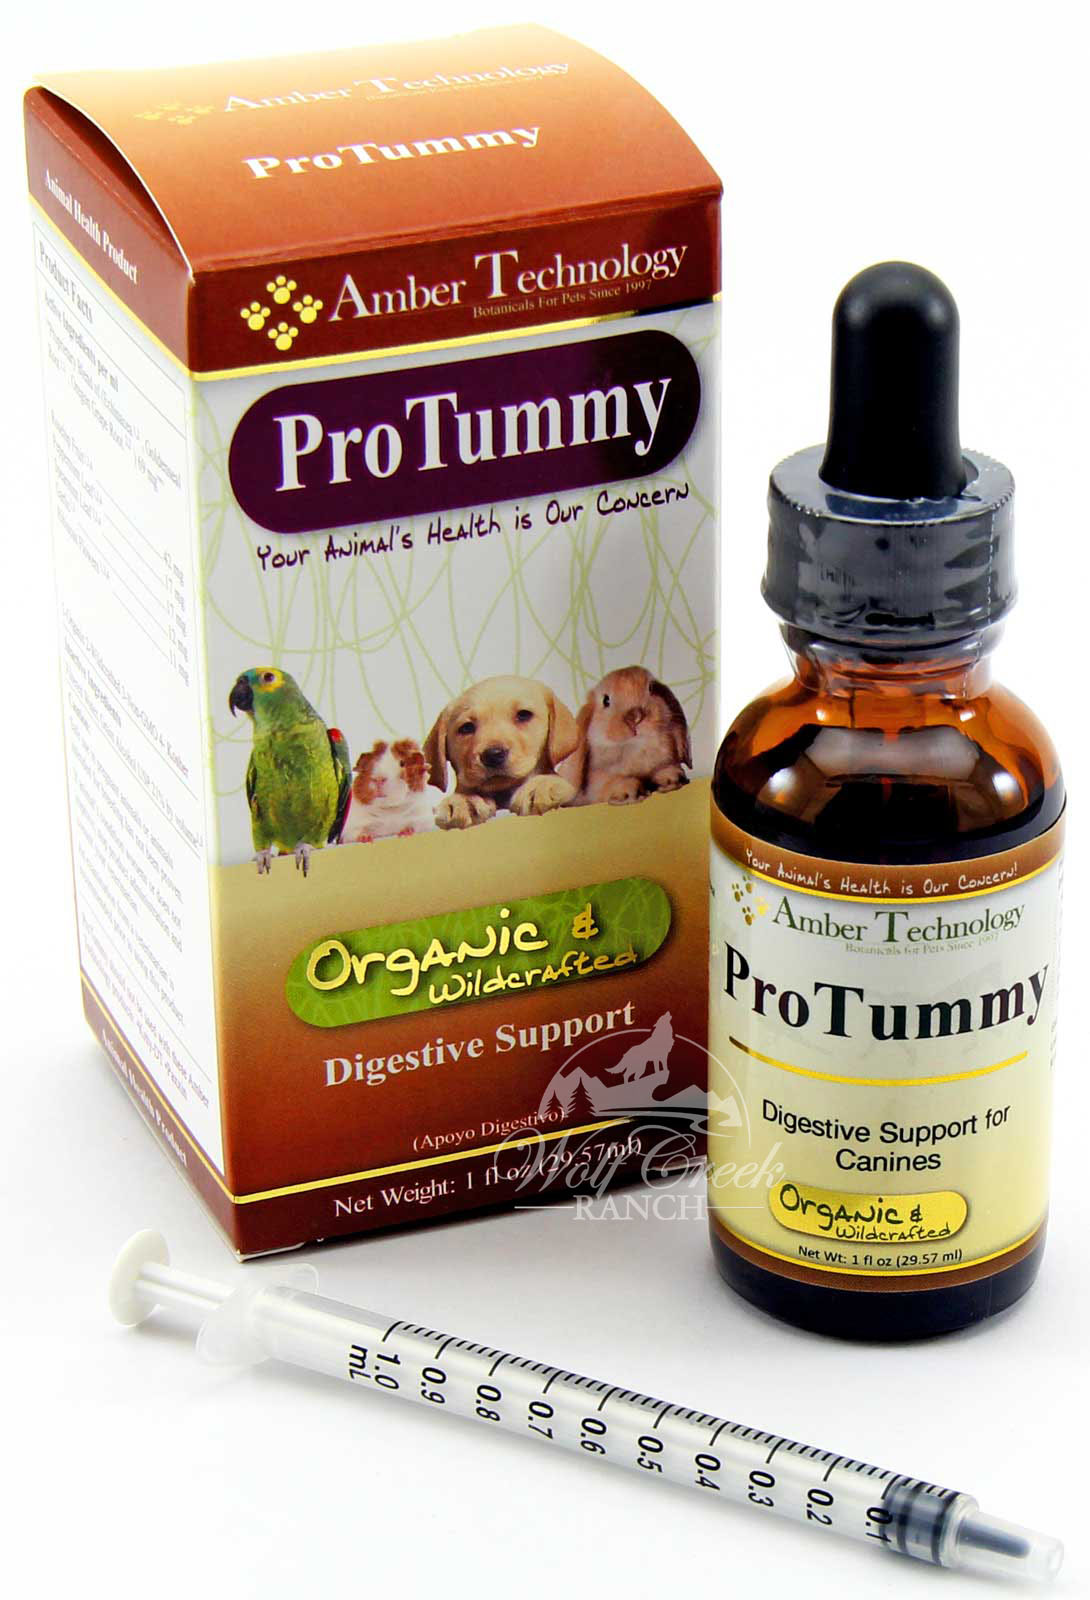 ProTummy helps heal intestinal distress in dogs, birds, rabbits, and guinea pigs.  Buy ProTummy to make your pet's tummy feel better!